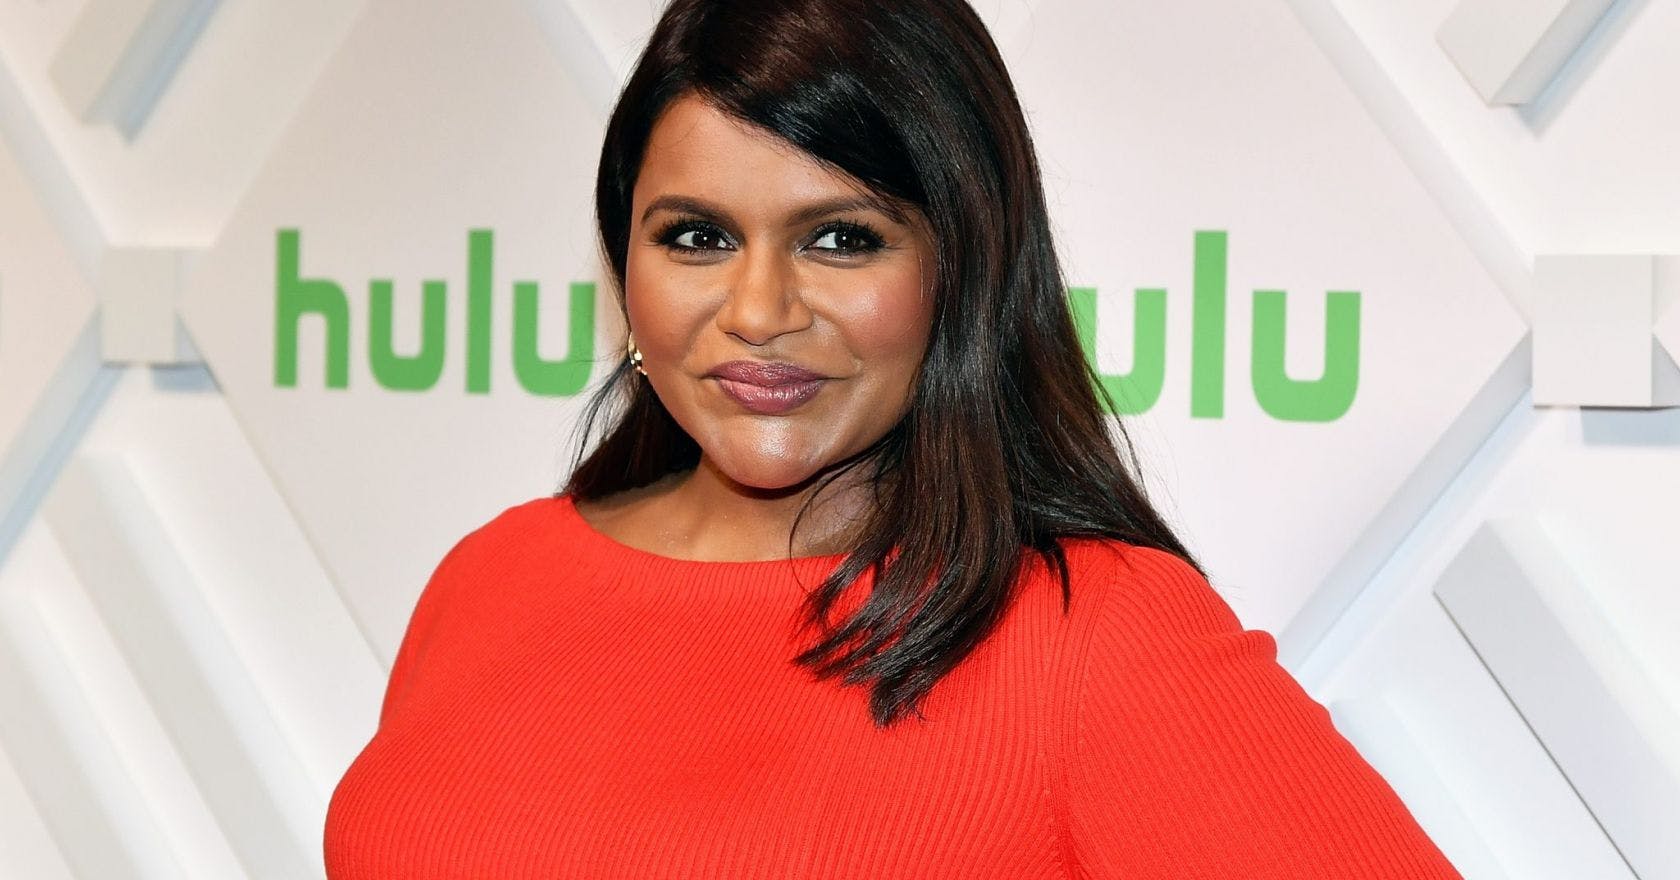 Mindy Kaling shares post on the reality of New Year's Eve